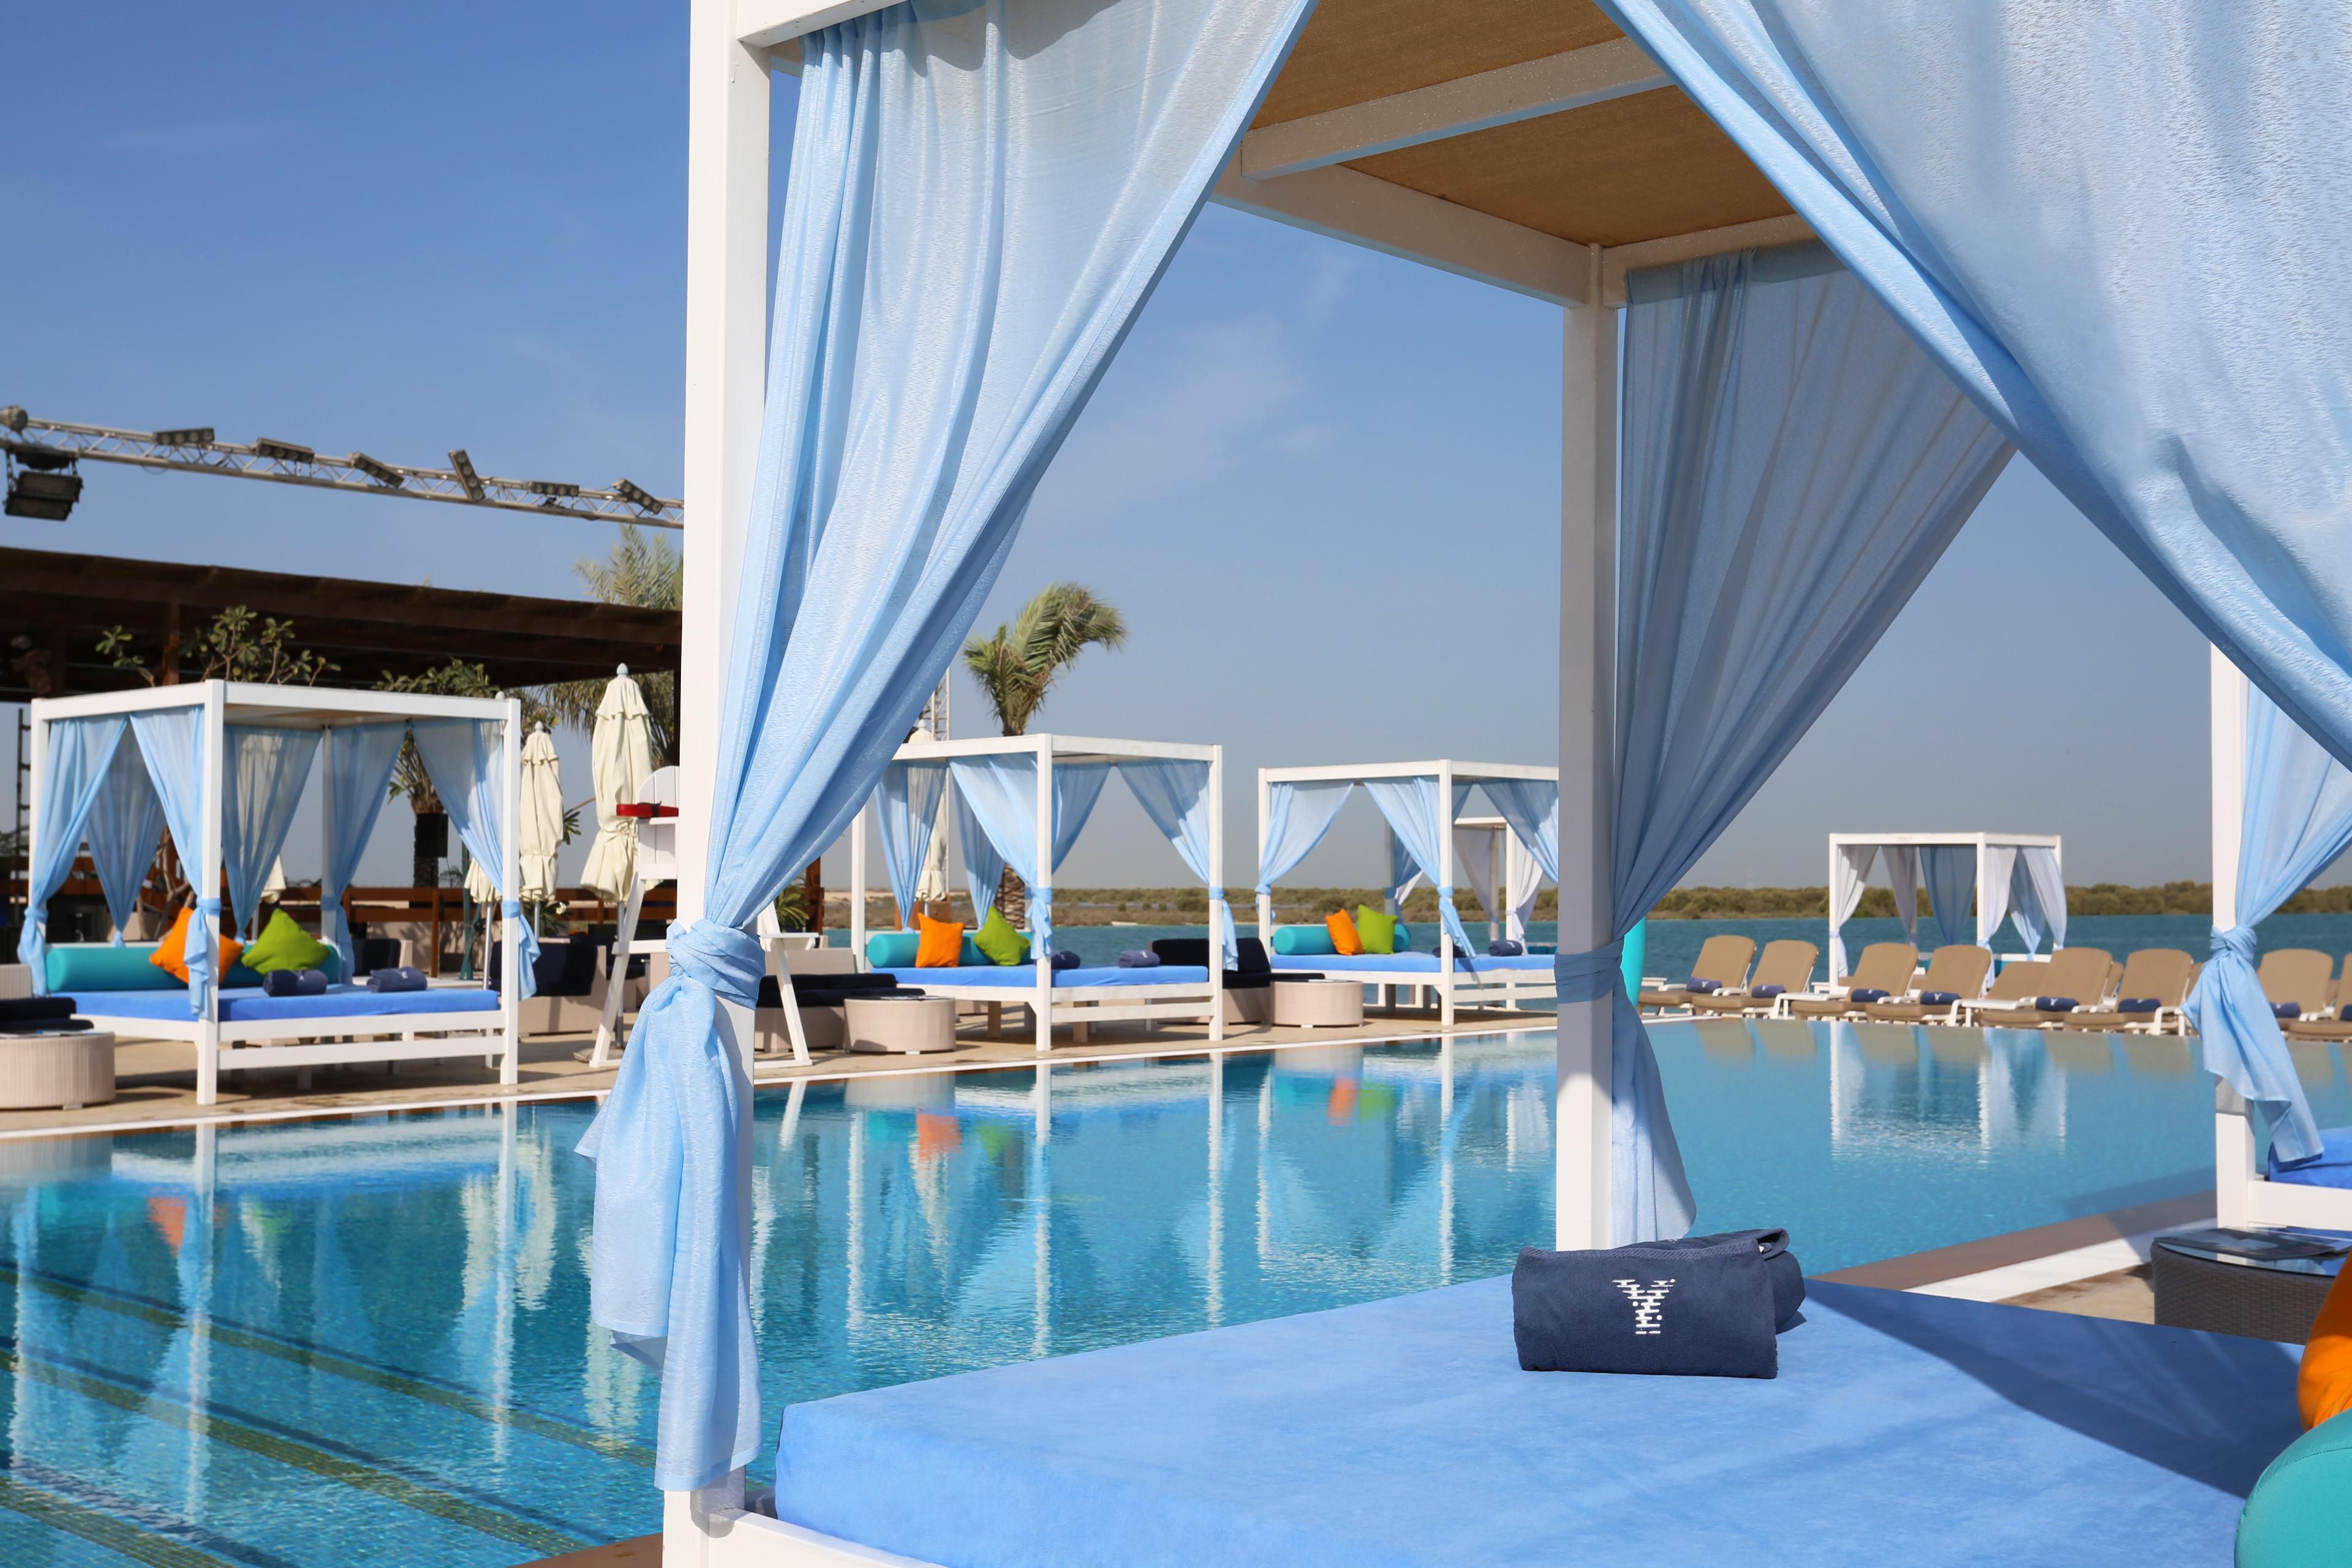 Have fun at the nearby Yas Beach Pool